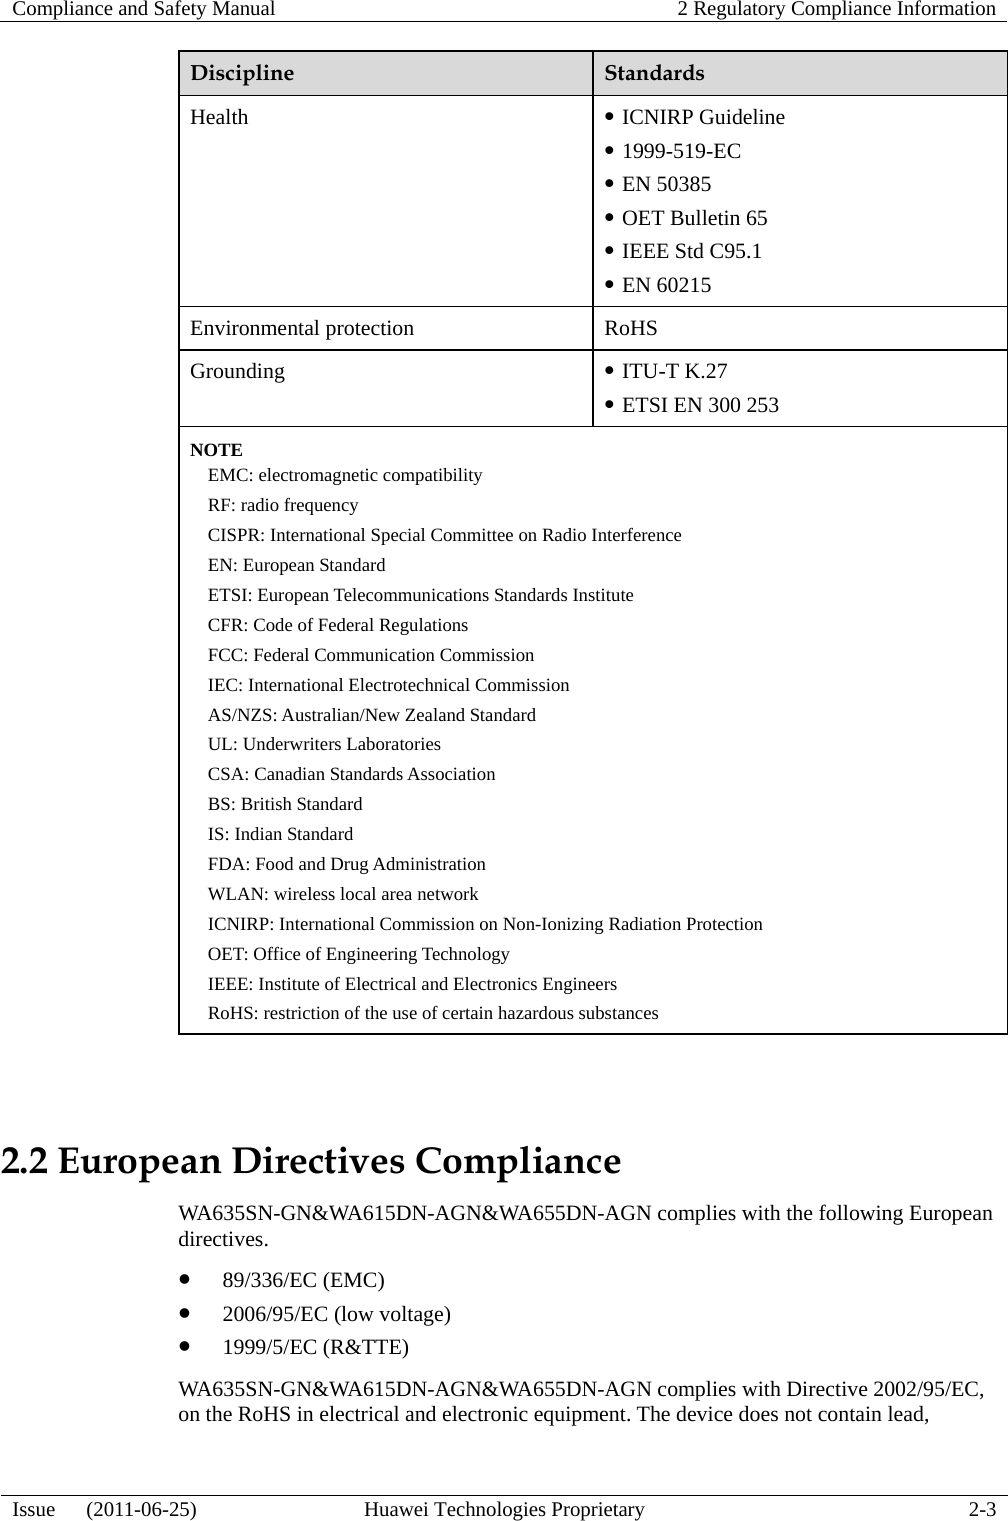 Compliance and Safety Manual  2 Regulatory Compliance Information  Issue   (2011-06-25)  Huawei Technologies Proprietary  2-3 Discipline  Standards Health  z ICNIRP Guideline z 1999-519-EC z EN 50385 z OET Bulletin 65 z IEEE Std C95.1 z EN 60215 Environmental protection  RoHS Grounding  z ITU-T K.27 z ETSI EN 300 253 NOTE EMC: electromagnetic compatibility RF: radio frequency CISPR: International Special Committee on Radio Interference EN: European Standard ETSI: European Telecommunications Standards Institute CFR: Code of Federal Regulations FCC: Federal Communication Commission IEC: International Electrotechnical Commission AS/NZS: Australian/New Zealand Standard UL: Underwriters Laboratories CSA: Canadian Standards Association BS: British Standard IS: Indian Standard FDA: Food and Drug Administration WLAN: wireless local area network ICNIRP: International Commission on Non-Ionizing Radiation Protection OET: Office of Engineering Technology IEEE: Institute of Electrical and Electronics Engineers RoHS: restriction of the use of certain hazardous substances  2.2 European Directives Compliance WA635SN-GN&amp;WA615DN-AGN&amp;WA655DN-AGN complies with the following European directives. z 89/336/EC (EMC) z 2006/95/EC (low voltage) z 1999/5/EC (R&amp;TTE) WA635SN-GN&amp;WA615DN-AGN&amp;WA655DN-AGN complies with Directive 2002/95/EC, on the RoHS in electrical and electronic equipment. The device does not contain lead, 